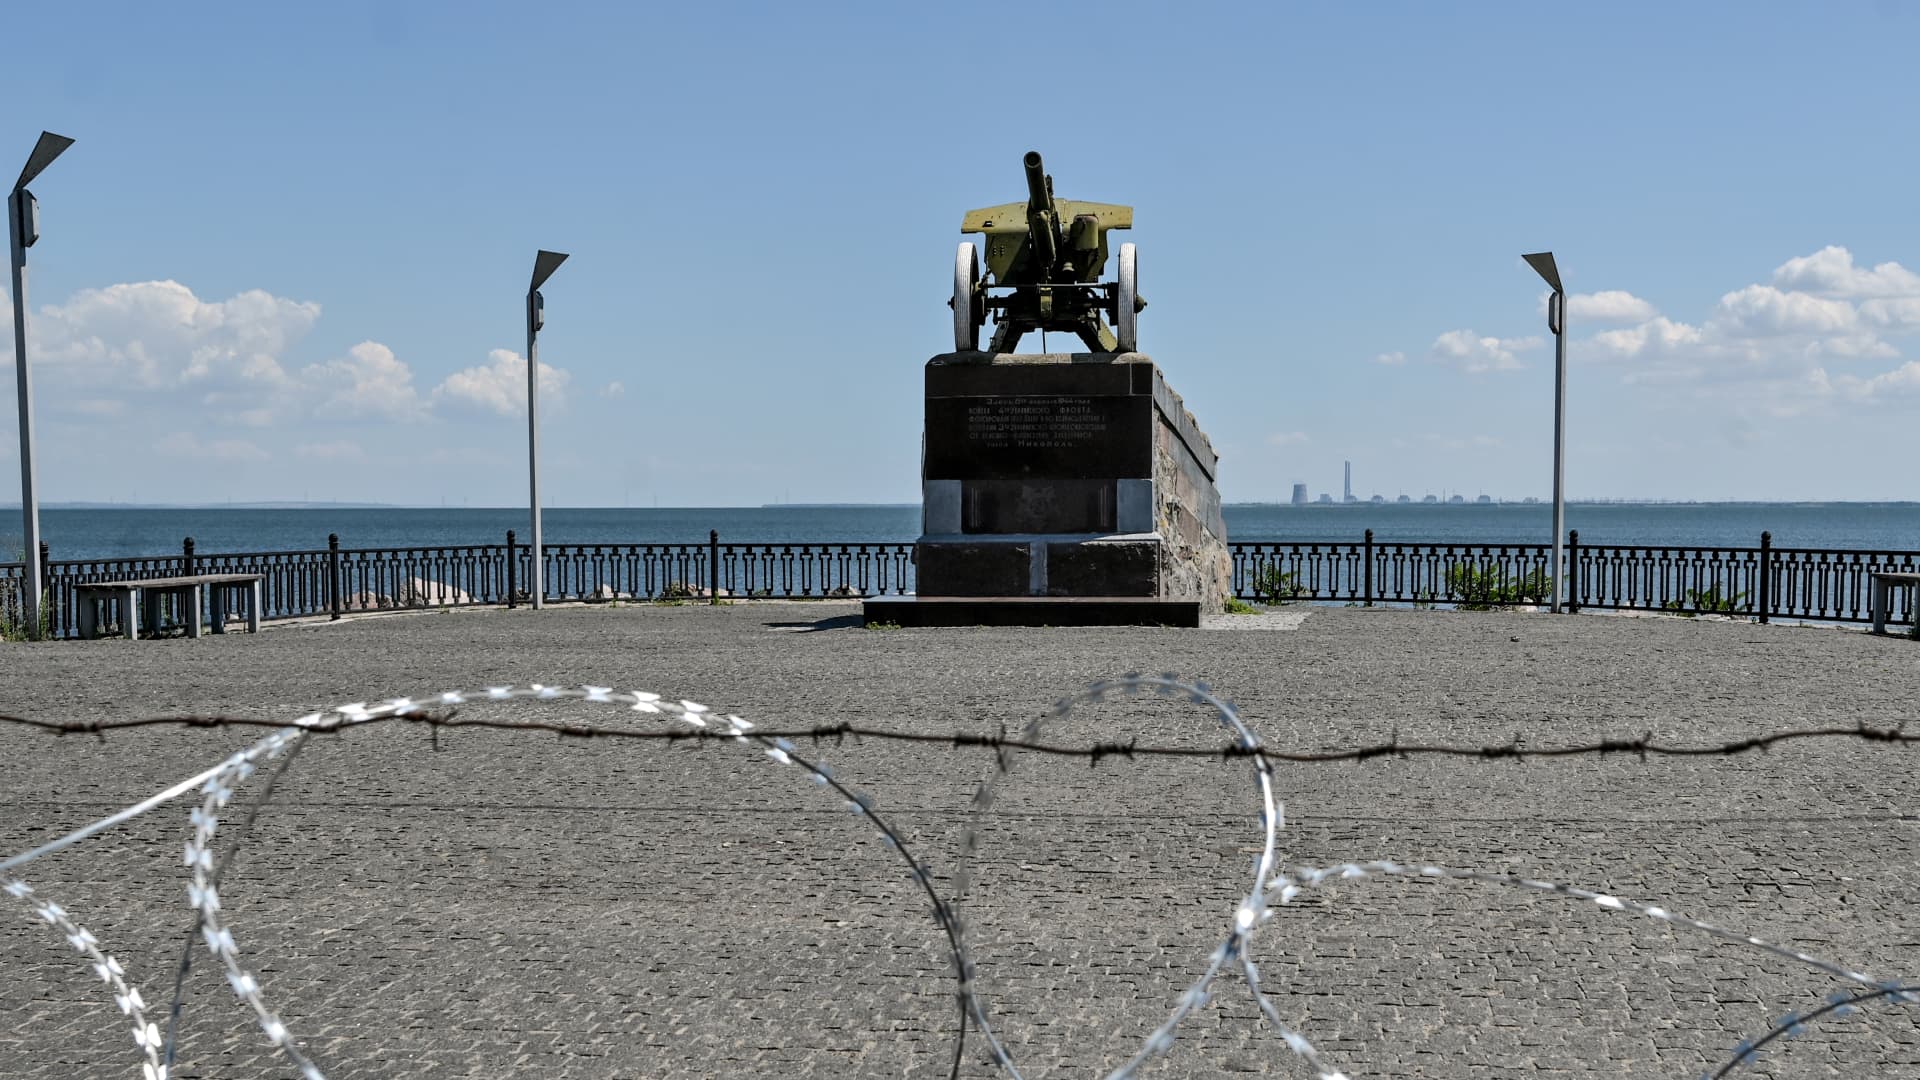 A monument pictured on the Nikopol embankment in front of the Zaporizhzhia Nuclear Power Plant used by the Russian invaders as the place to bombard Nikopol, Dnipropetrovsk Region, central Ukraine on 20 July 2022. Russian forces have seized Ukraine's second biggest power plant and Moscow will be redeploying large numbers of troops to three southern regions, said a senior advisor to Ukrainian President Zelenskyy, according to NBC News.